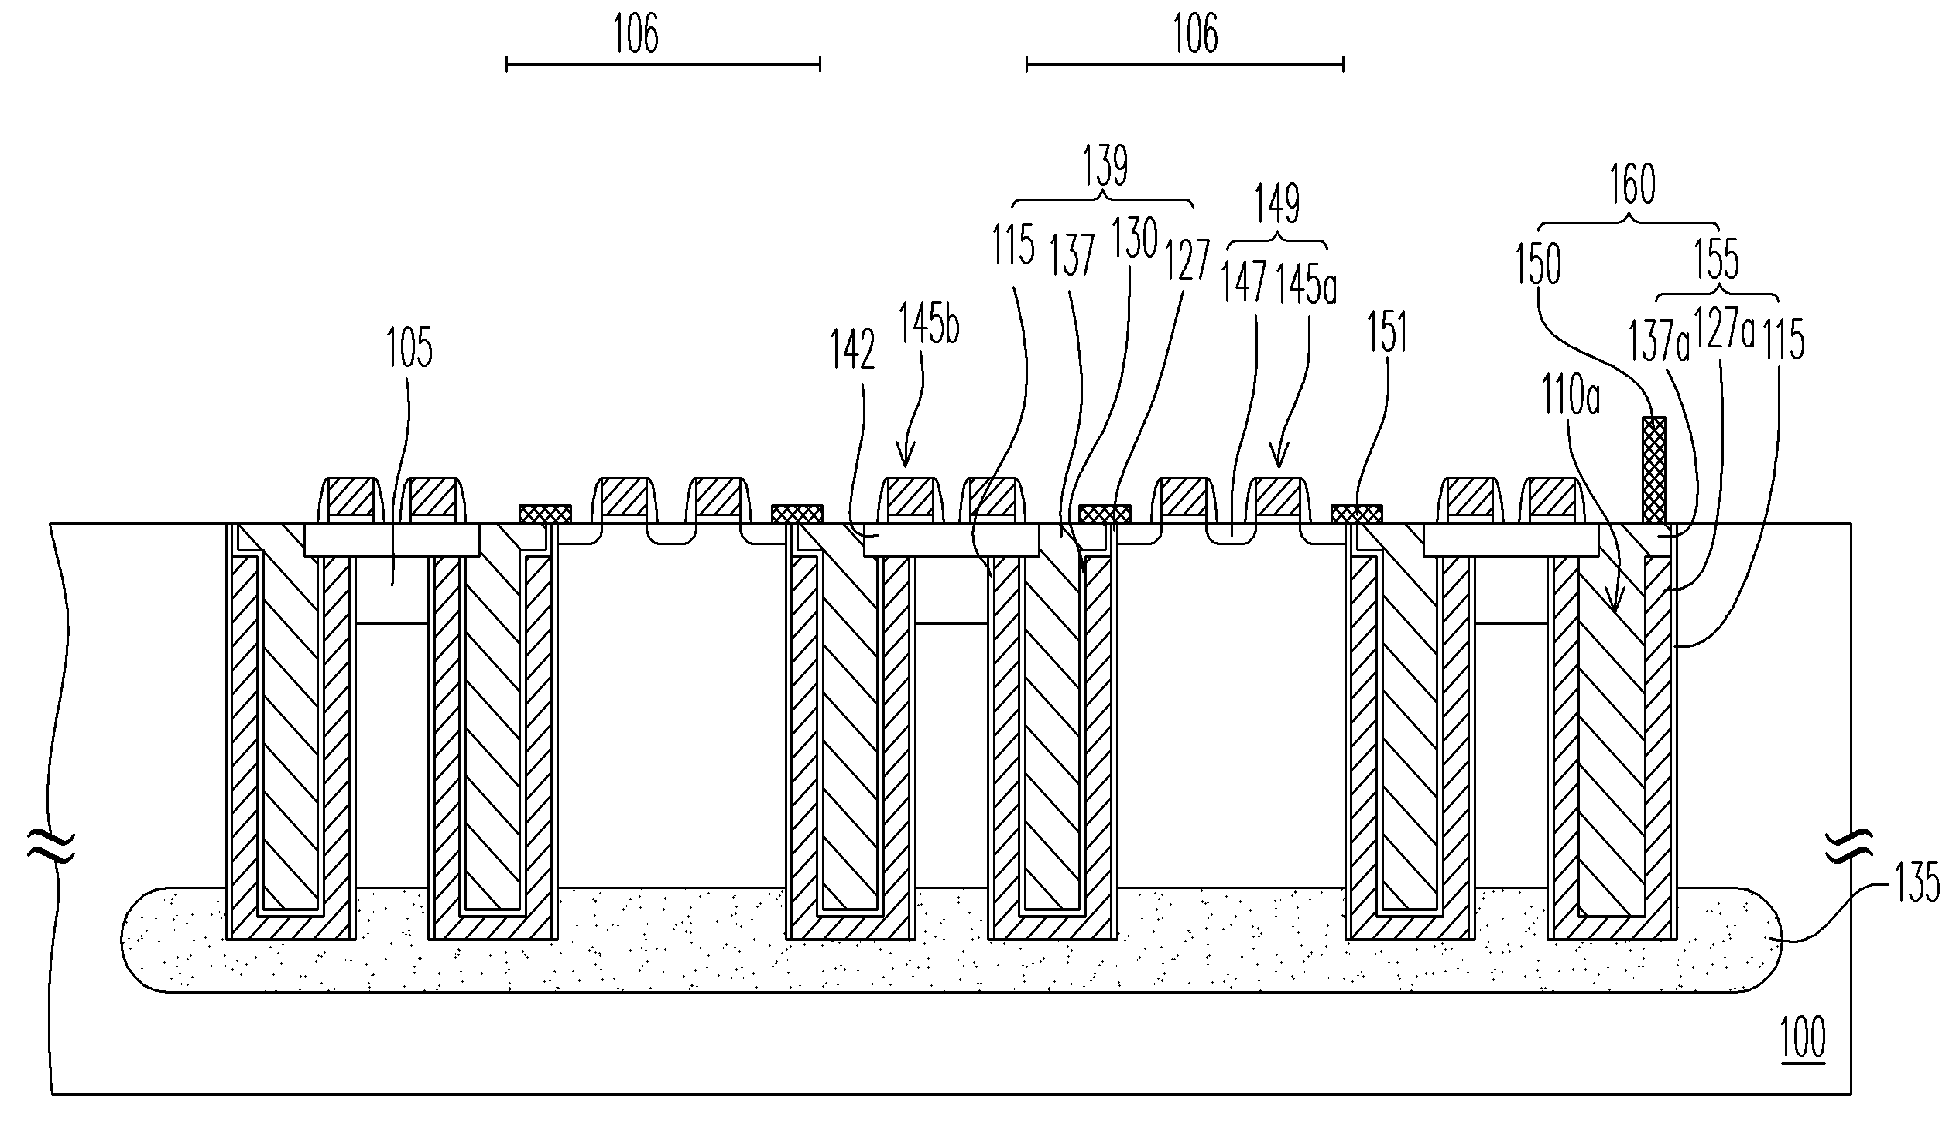 Pick-up structure for DRAM capacitors